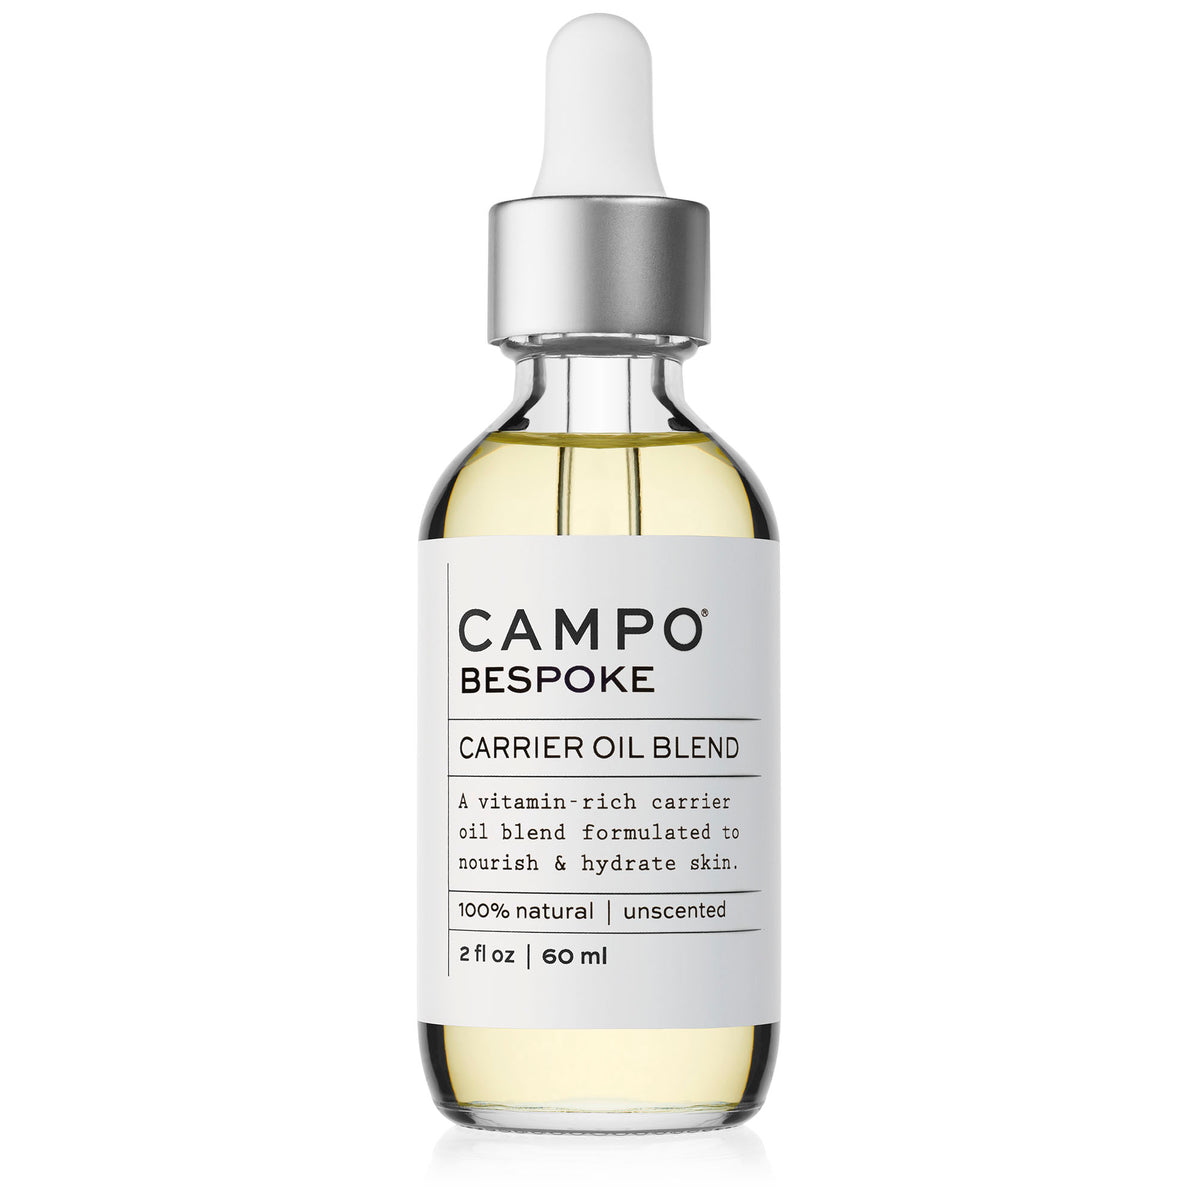 Campo Beauty Hydration Belly Oil - BESPOKE Blend that in 60 ml. Soothe sore muscles and pain. This unscented body oil gives your skin an instant glow and an infusion of nourishing deep hydration. Enjoy the unscented blend or add your favorite CAMPO essential oils to create your bespoke blend.